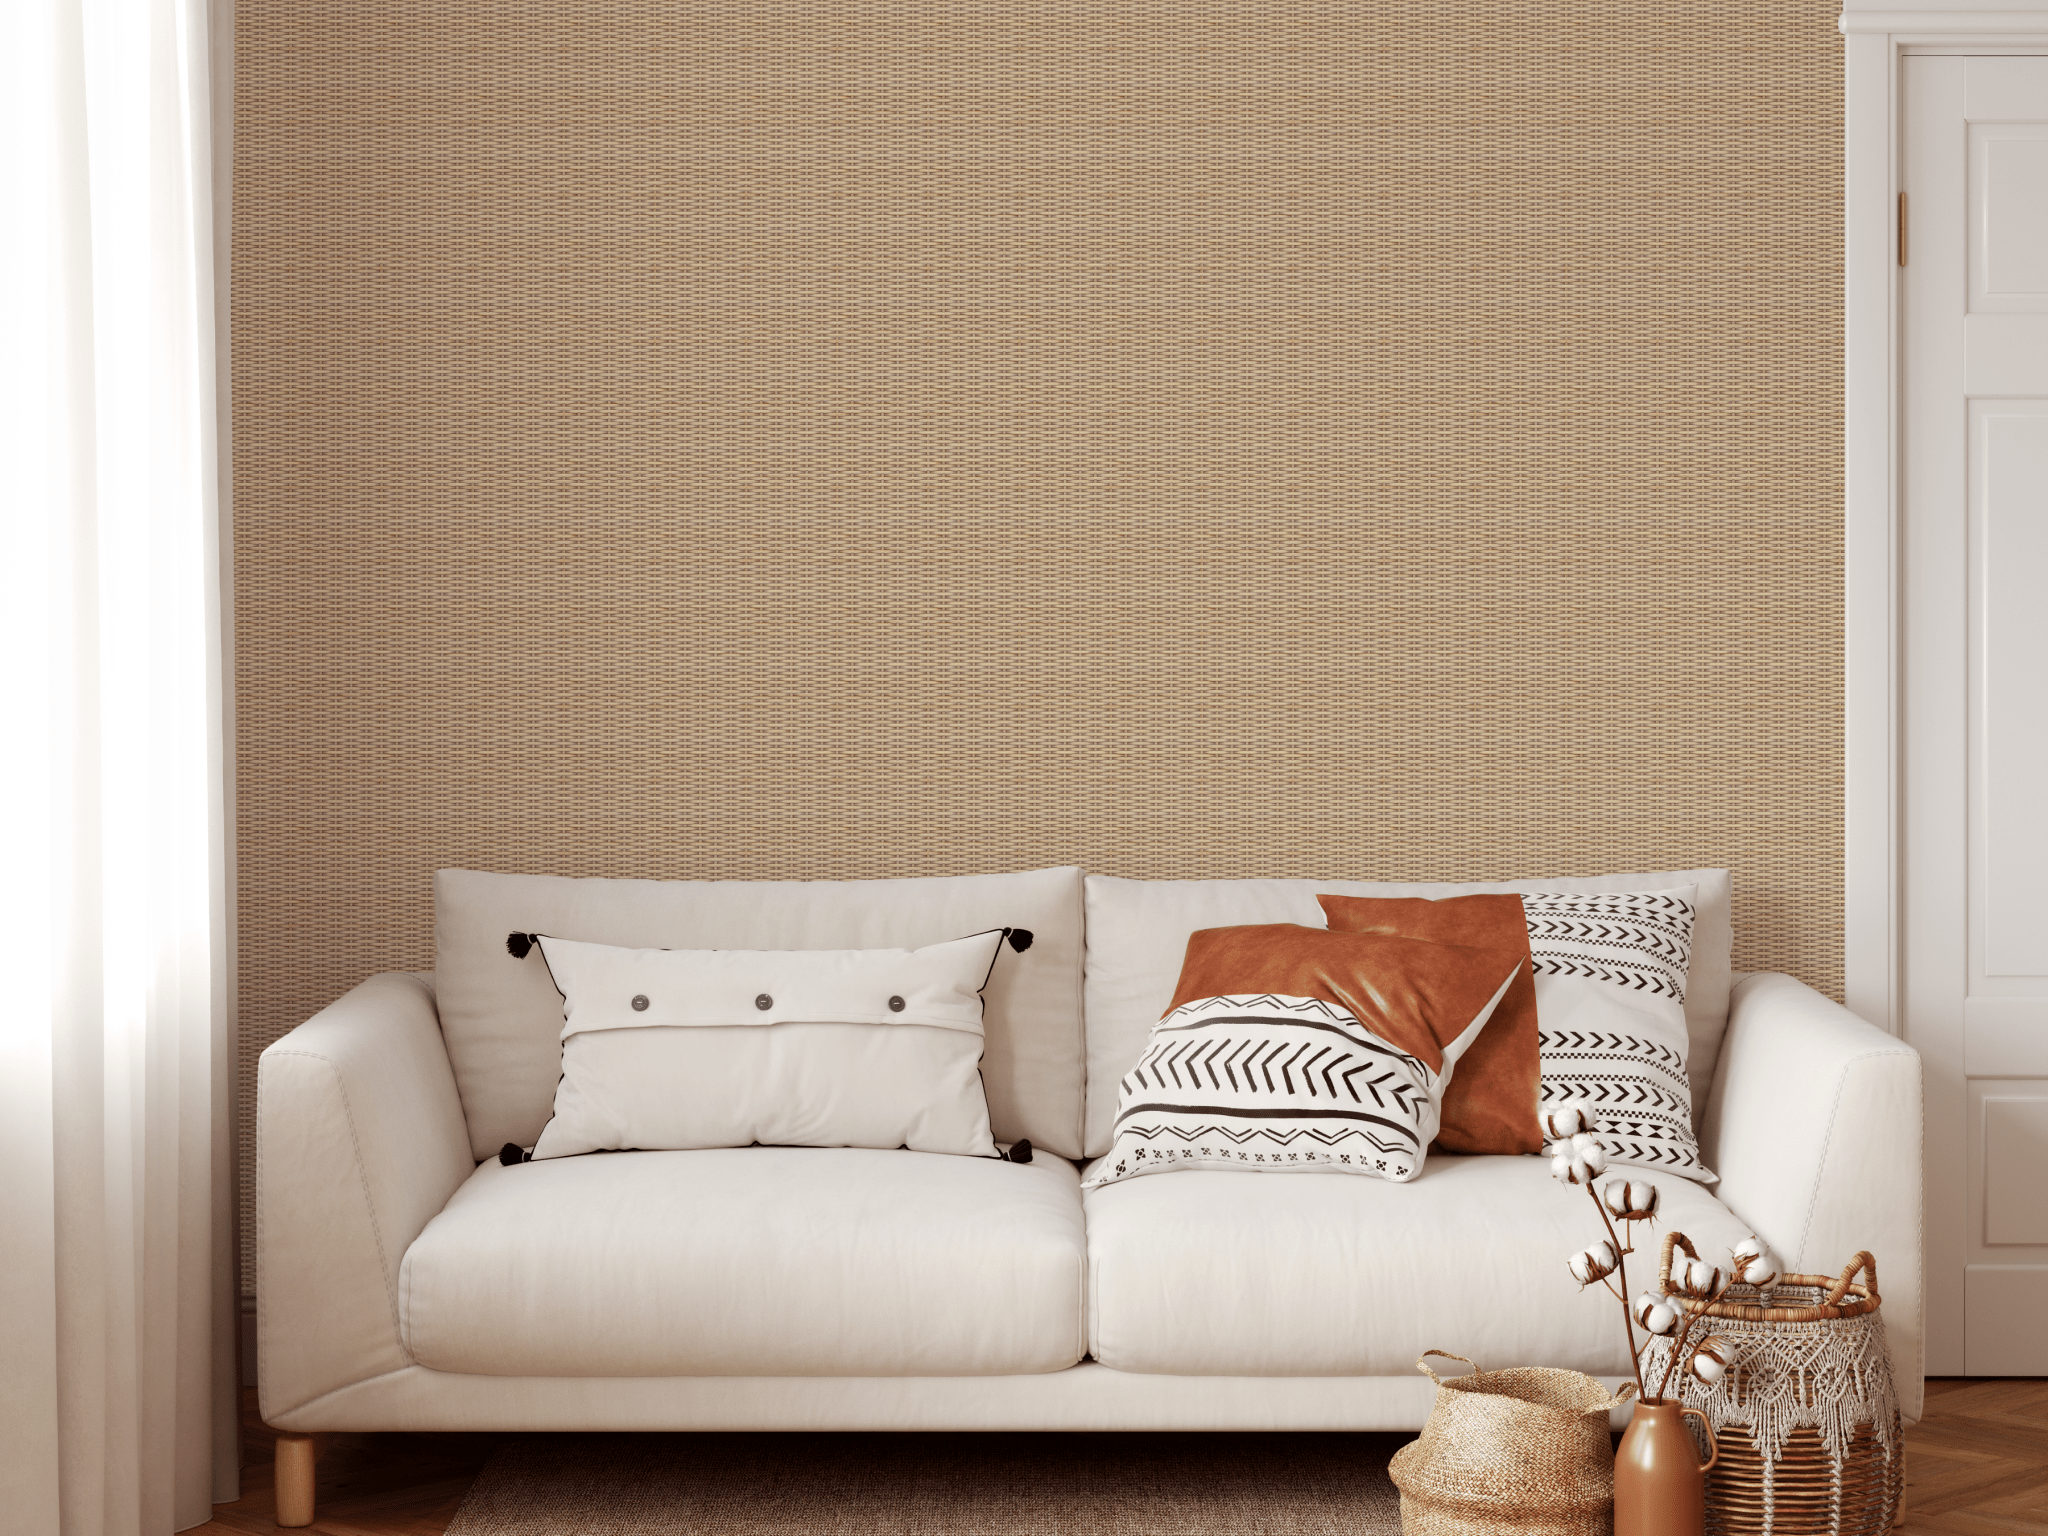 A cozy living space decorated with natural rattan weave wallpaper, a comfortable cream sofa adorned with stylish patterned pillows, and a bohemian-style woven basket with branches